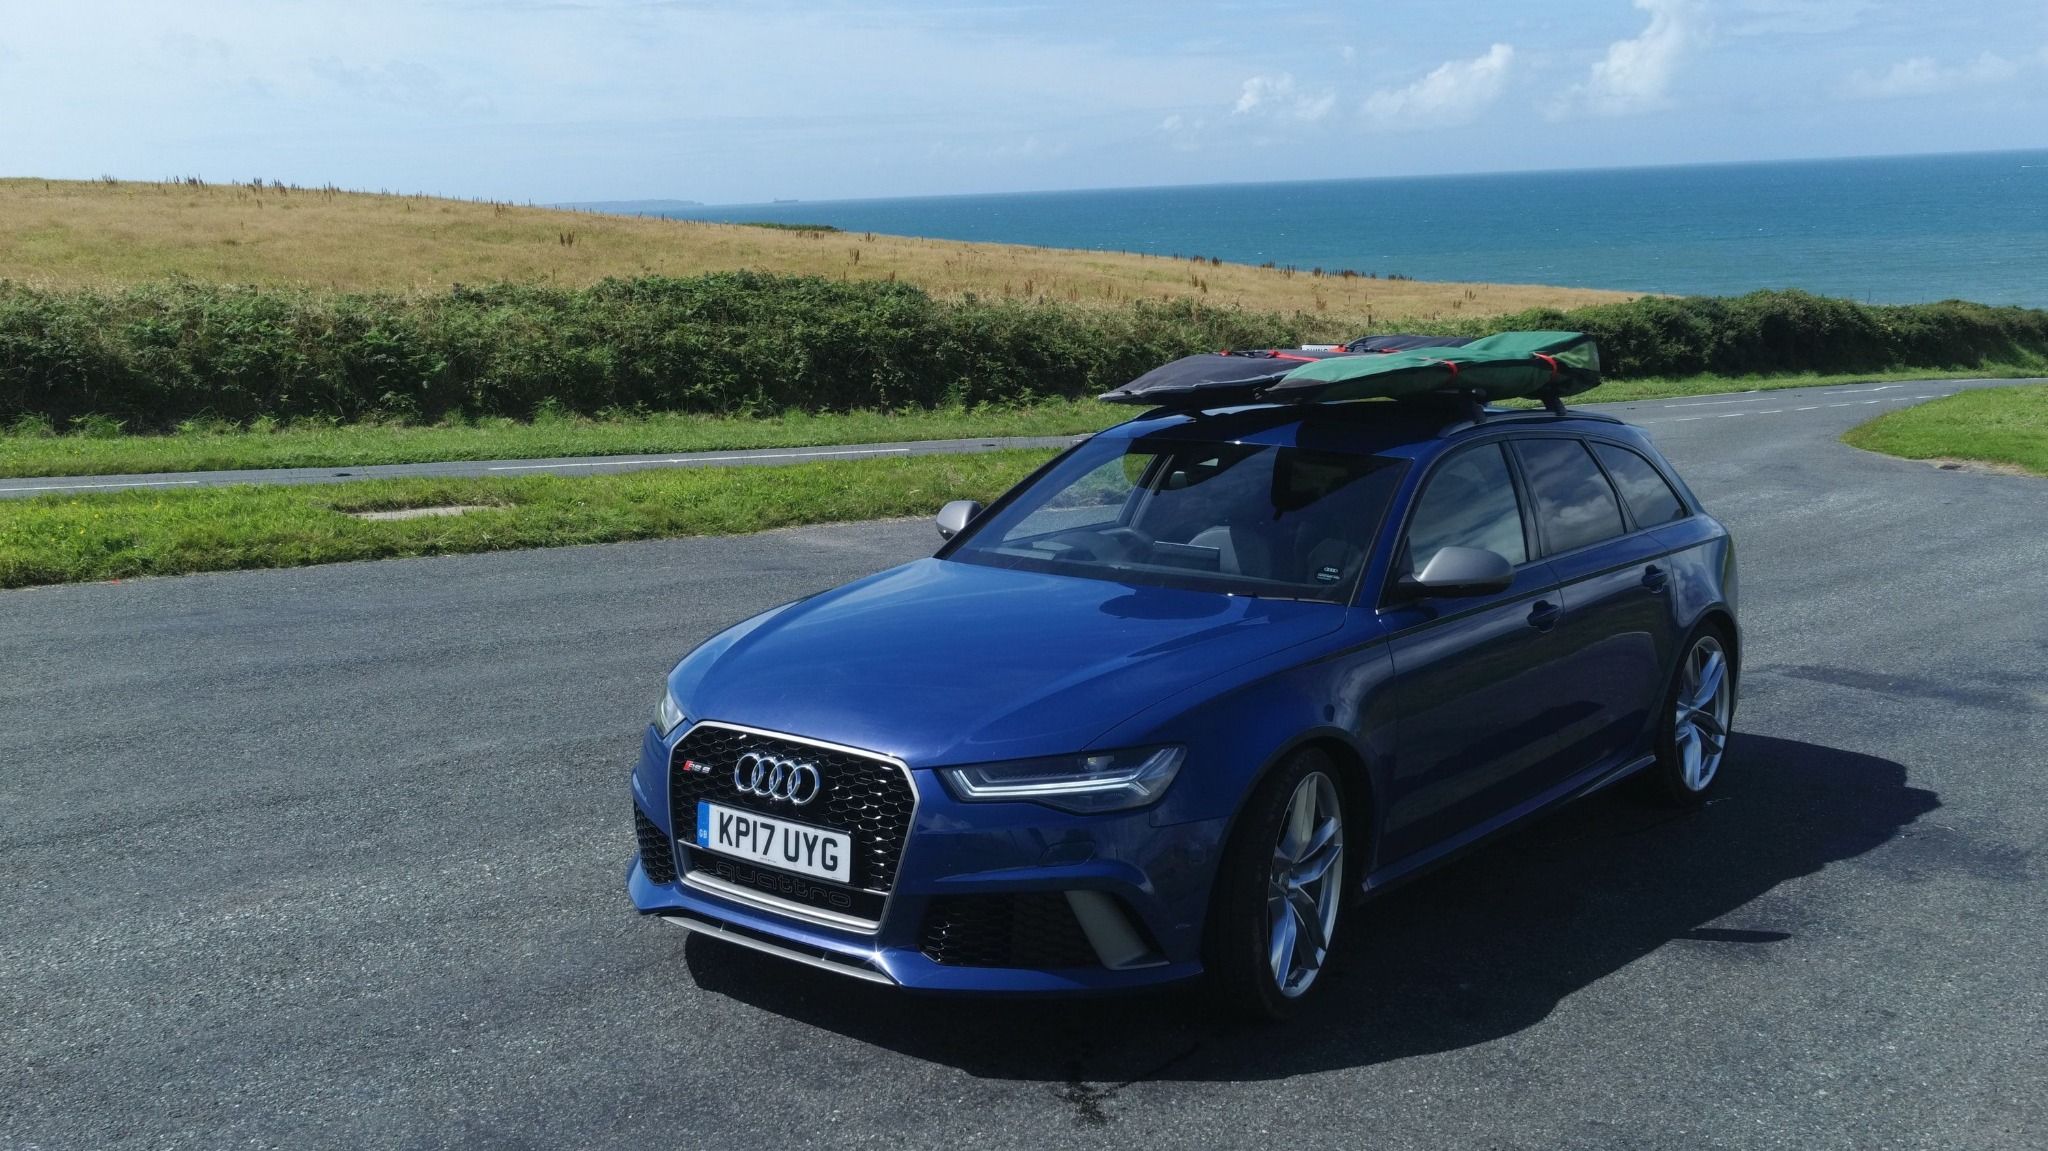 Audi RS6 at the beach